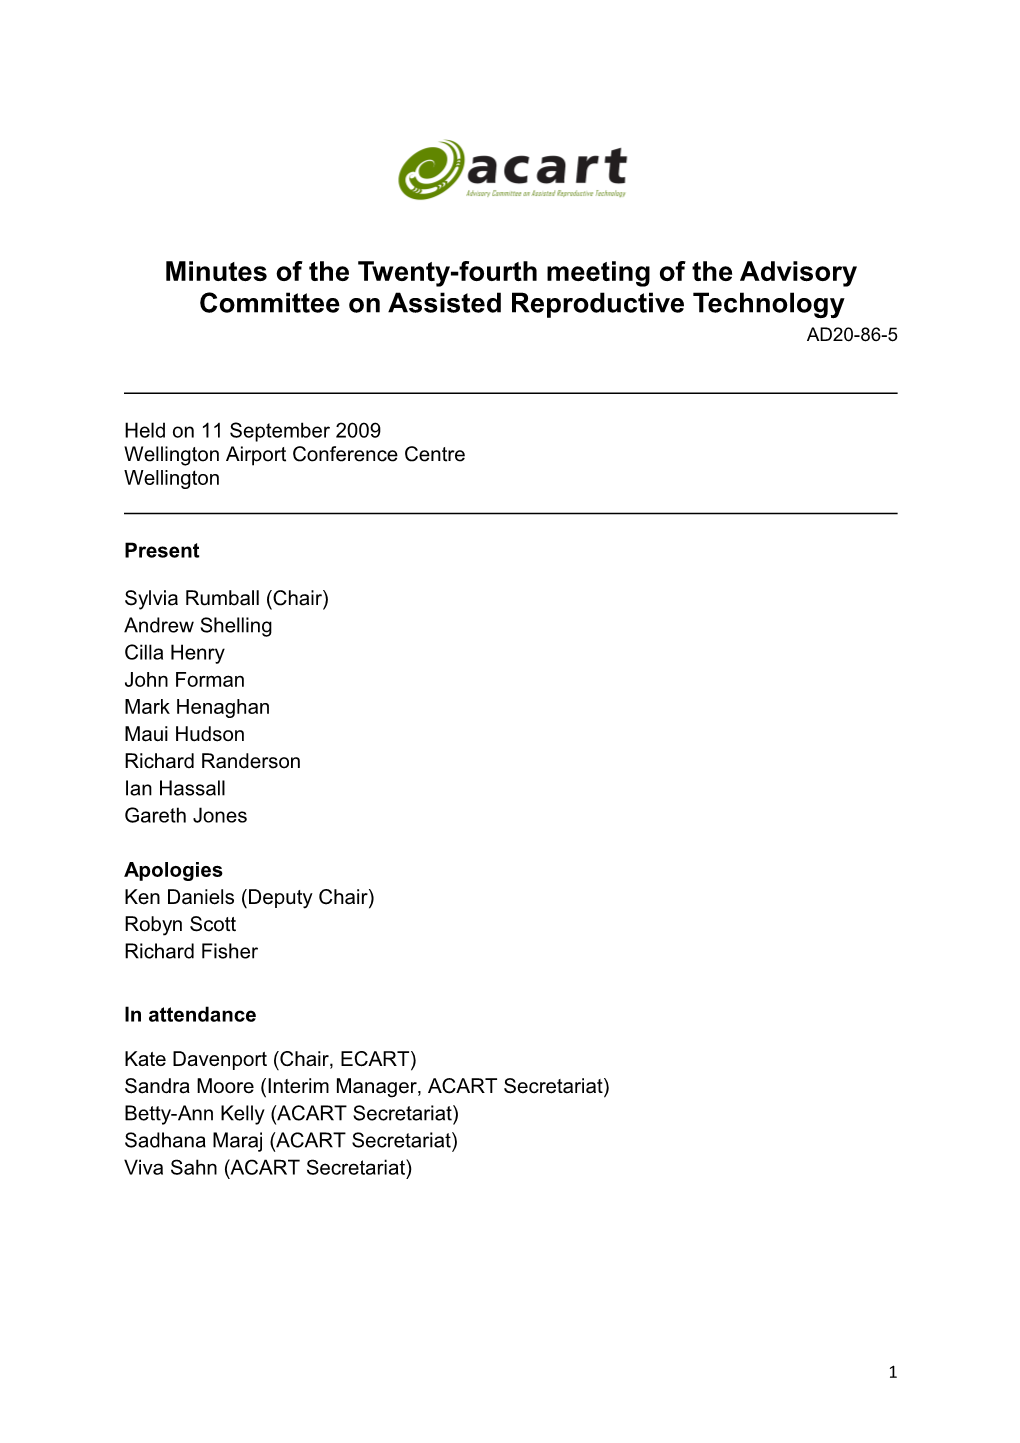 Minutes of the Twenty-Fourth Meeting of the Advisory Committee on Assisted Reproductive